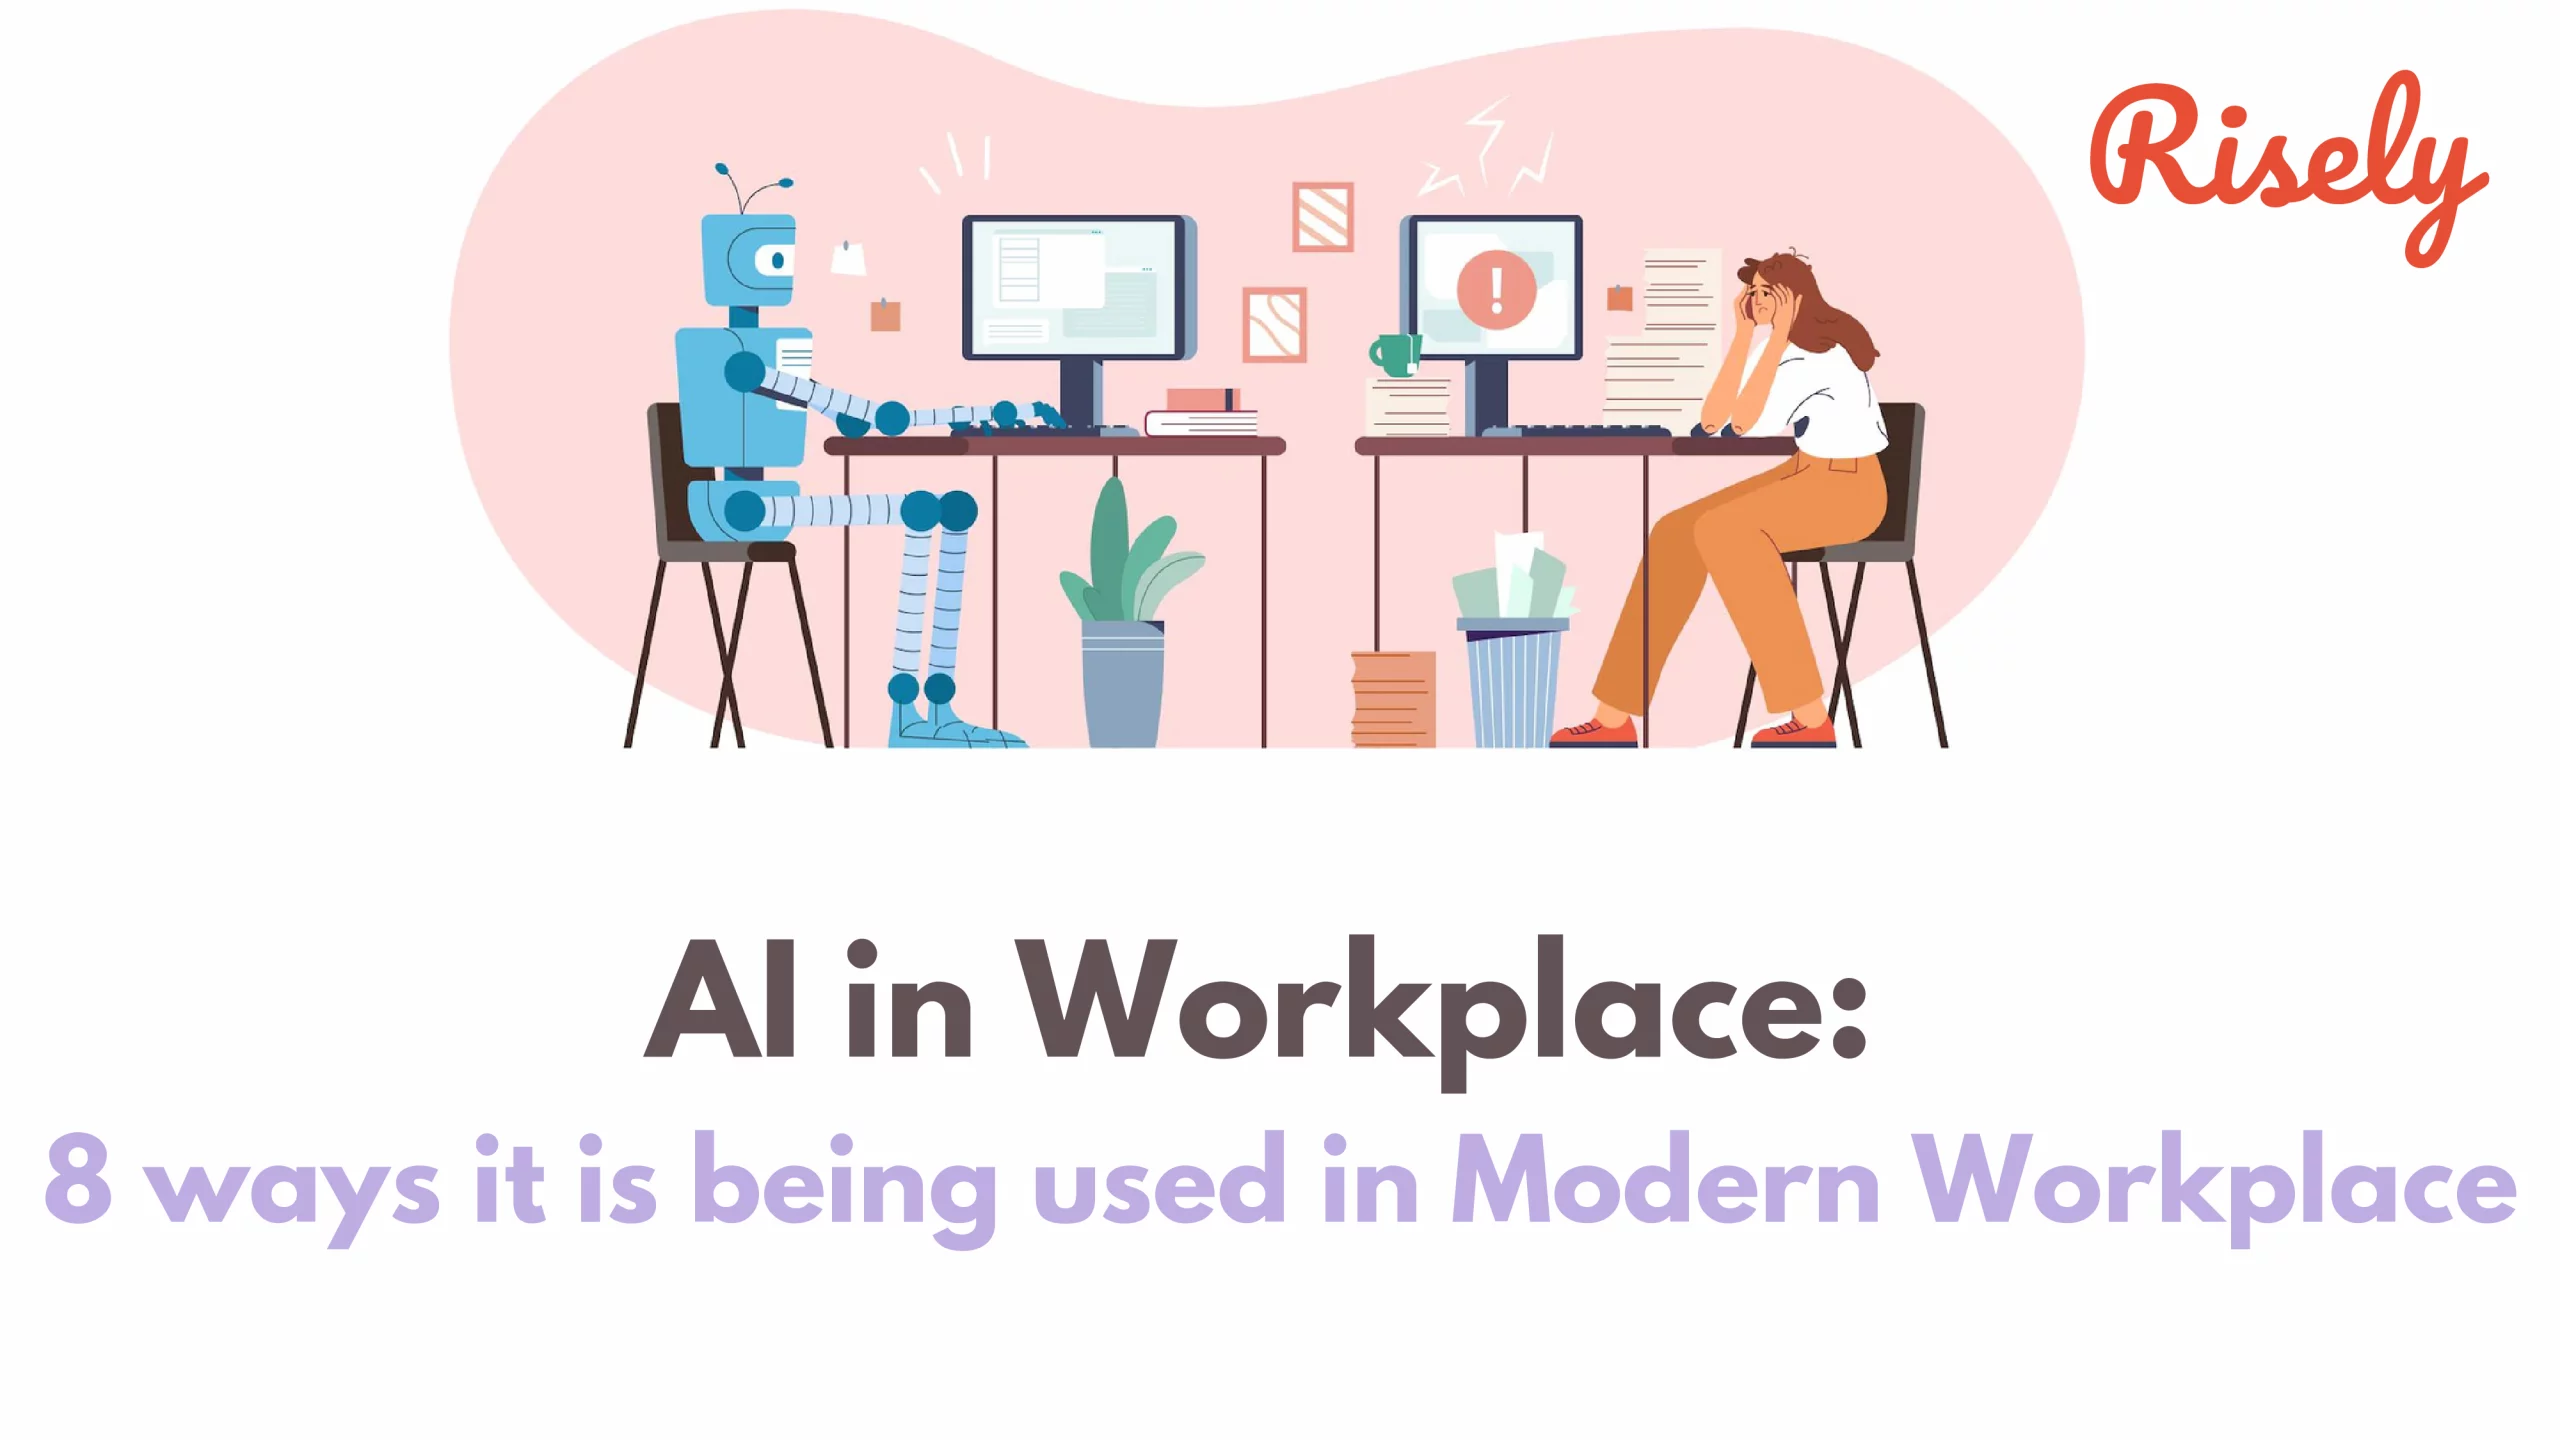 AI in Workplace: 8 ways it is being used in Modern Workplace